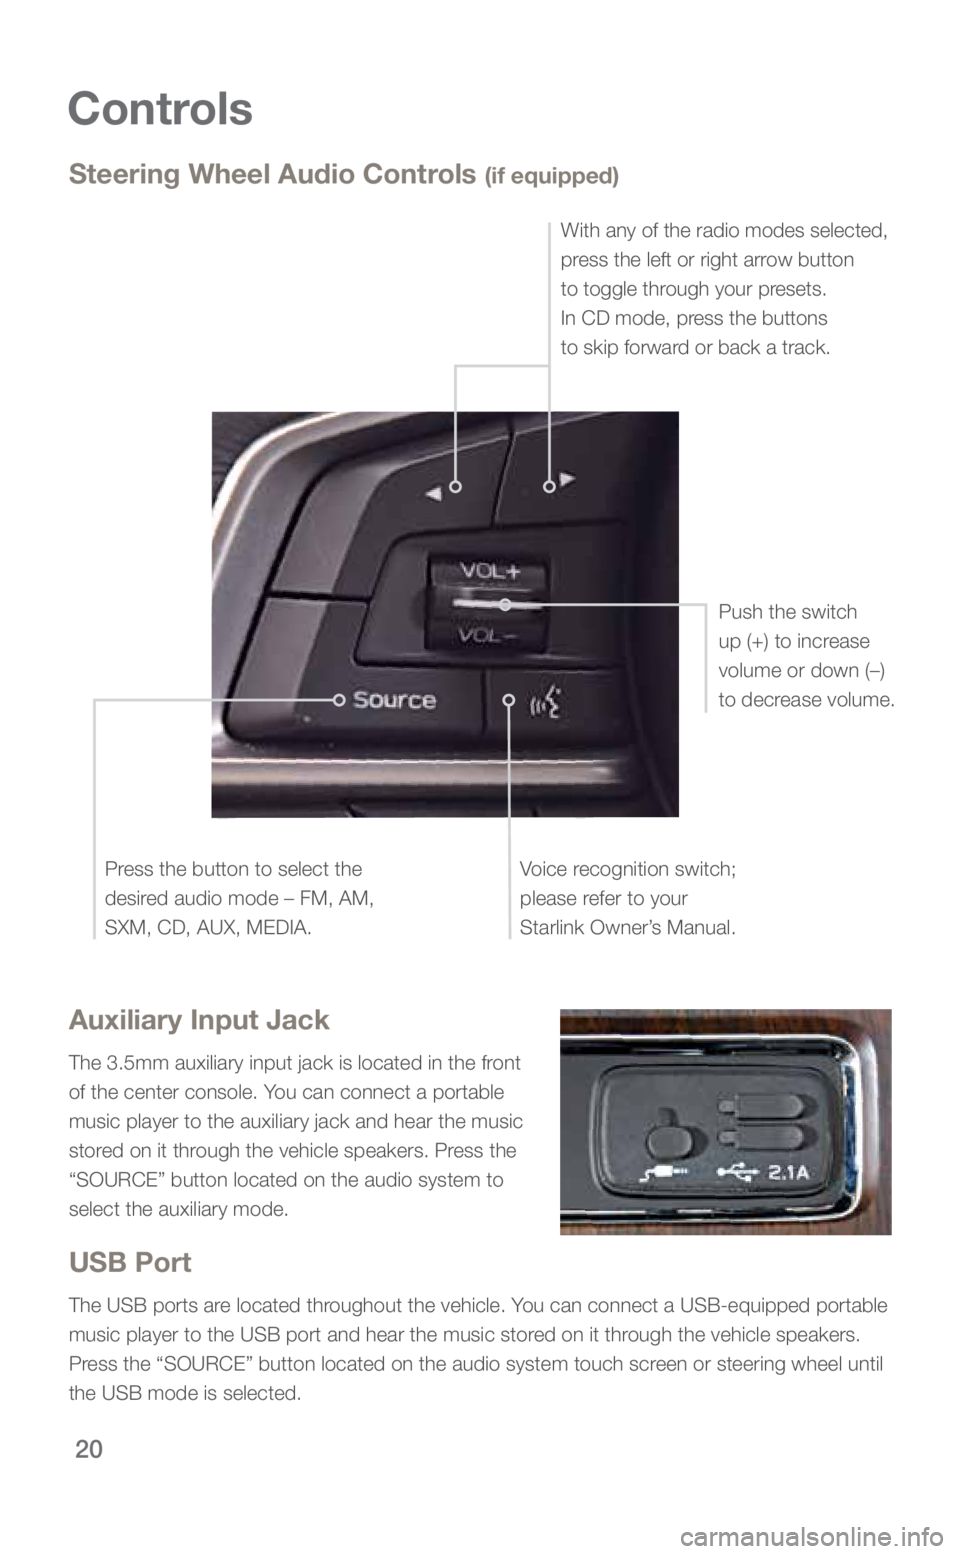 SUBARU ASCENT 2019  Quick Guide 20
Controls
Auxiliary Input Jack
The 3.5mm auxiliary input jack is located in the front 
of the center console. You can connect a portable 
music player to the auxiliary jack and hear the music 
store